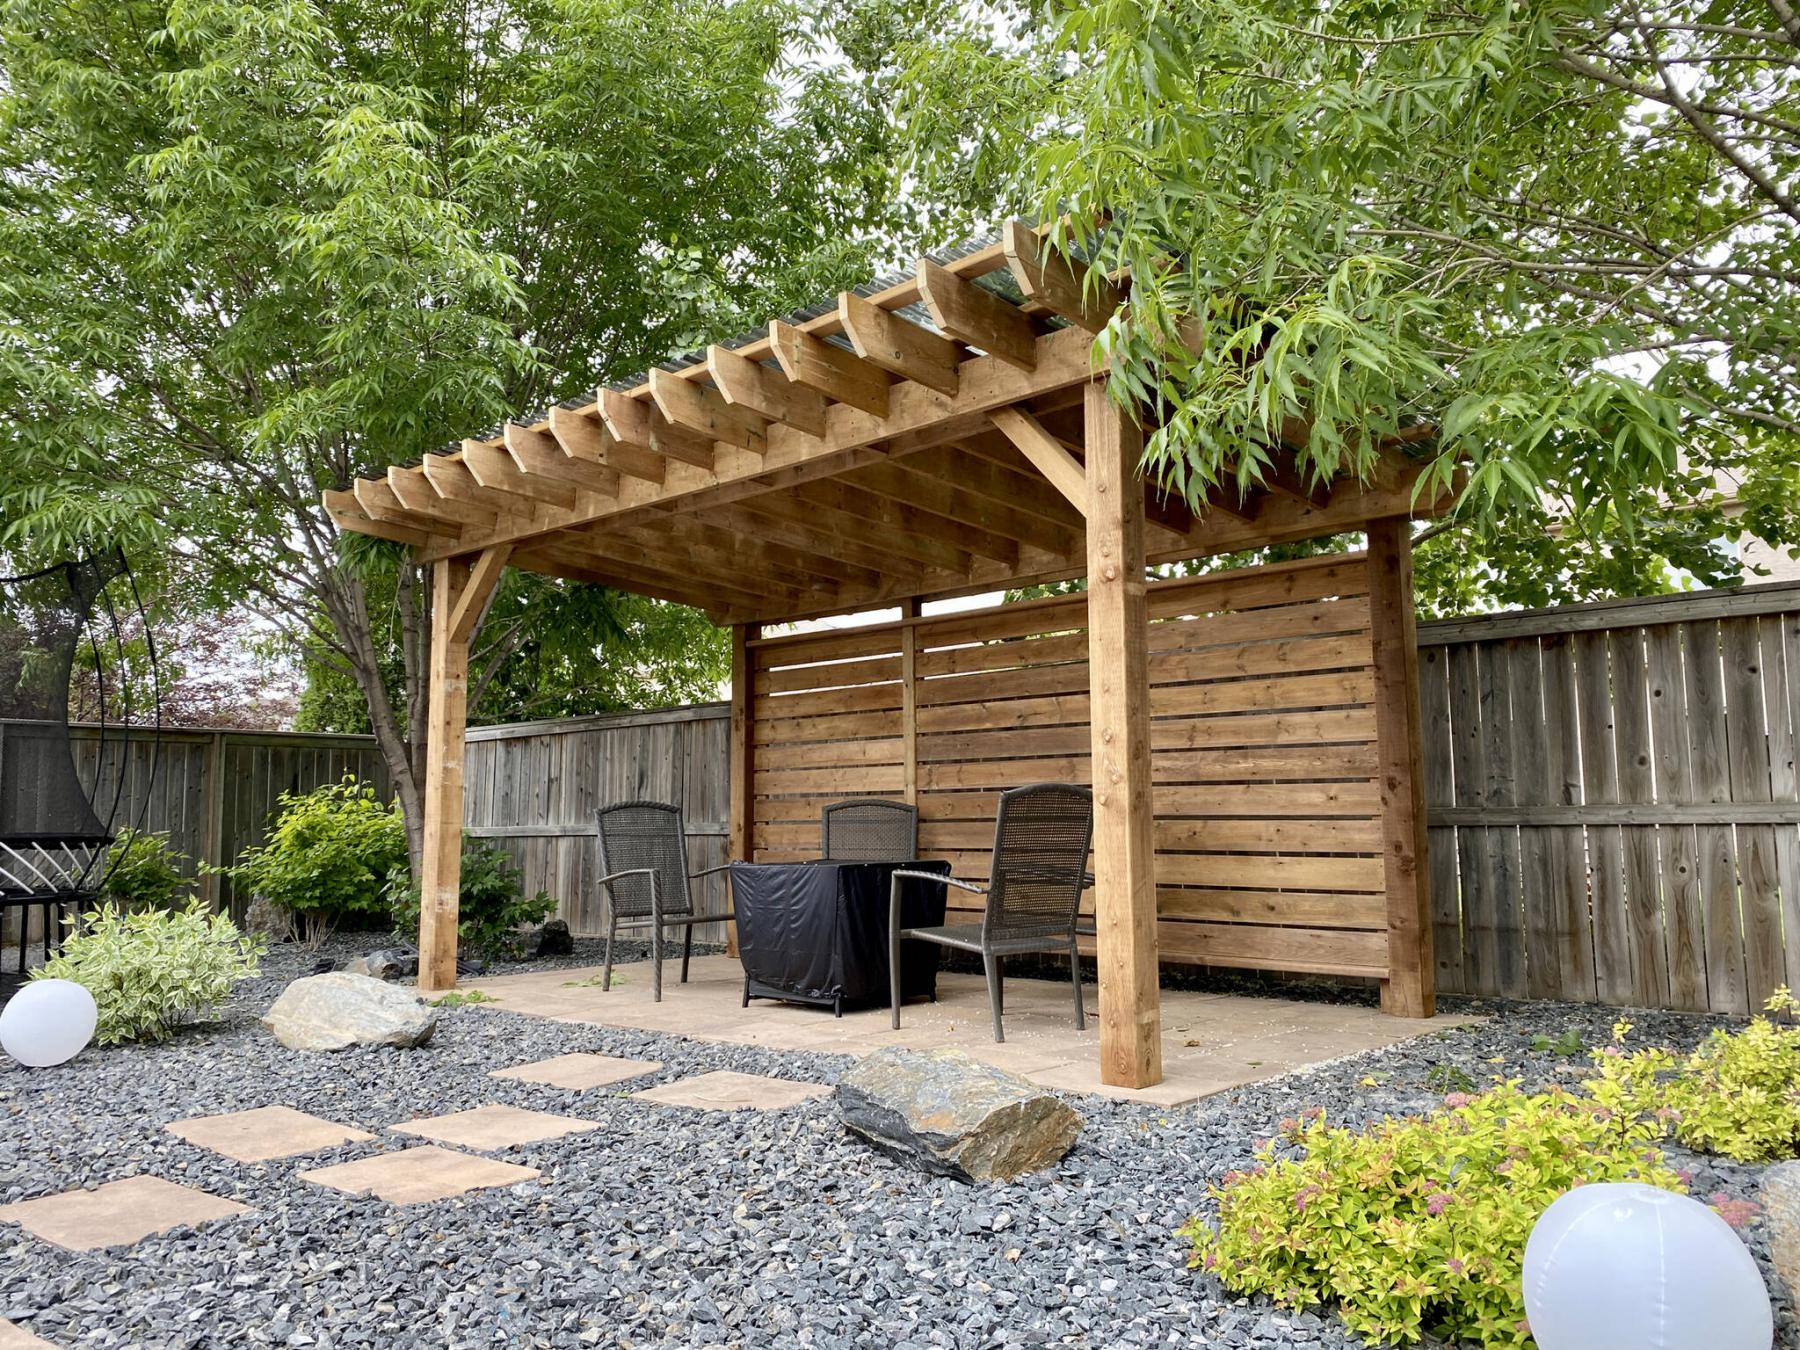 <p>Photos by Marc LaBossiere / Winnipeg Free Press</p><p>The 16-foot wide by 10-foot deep pergola is nestled within the trees at the far end of this backyard.</p>